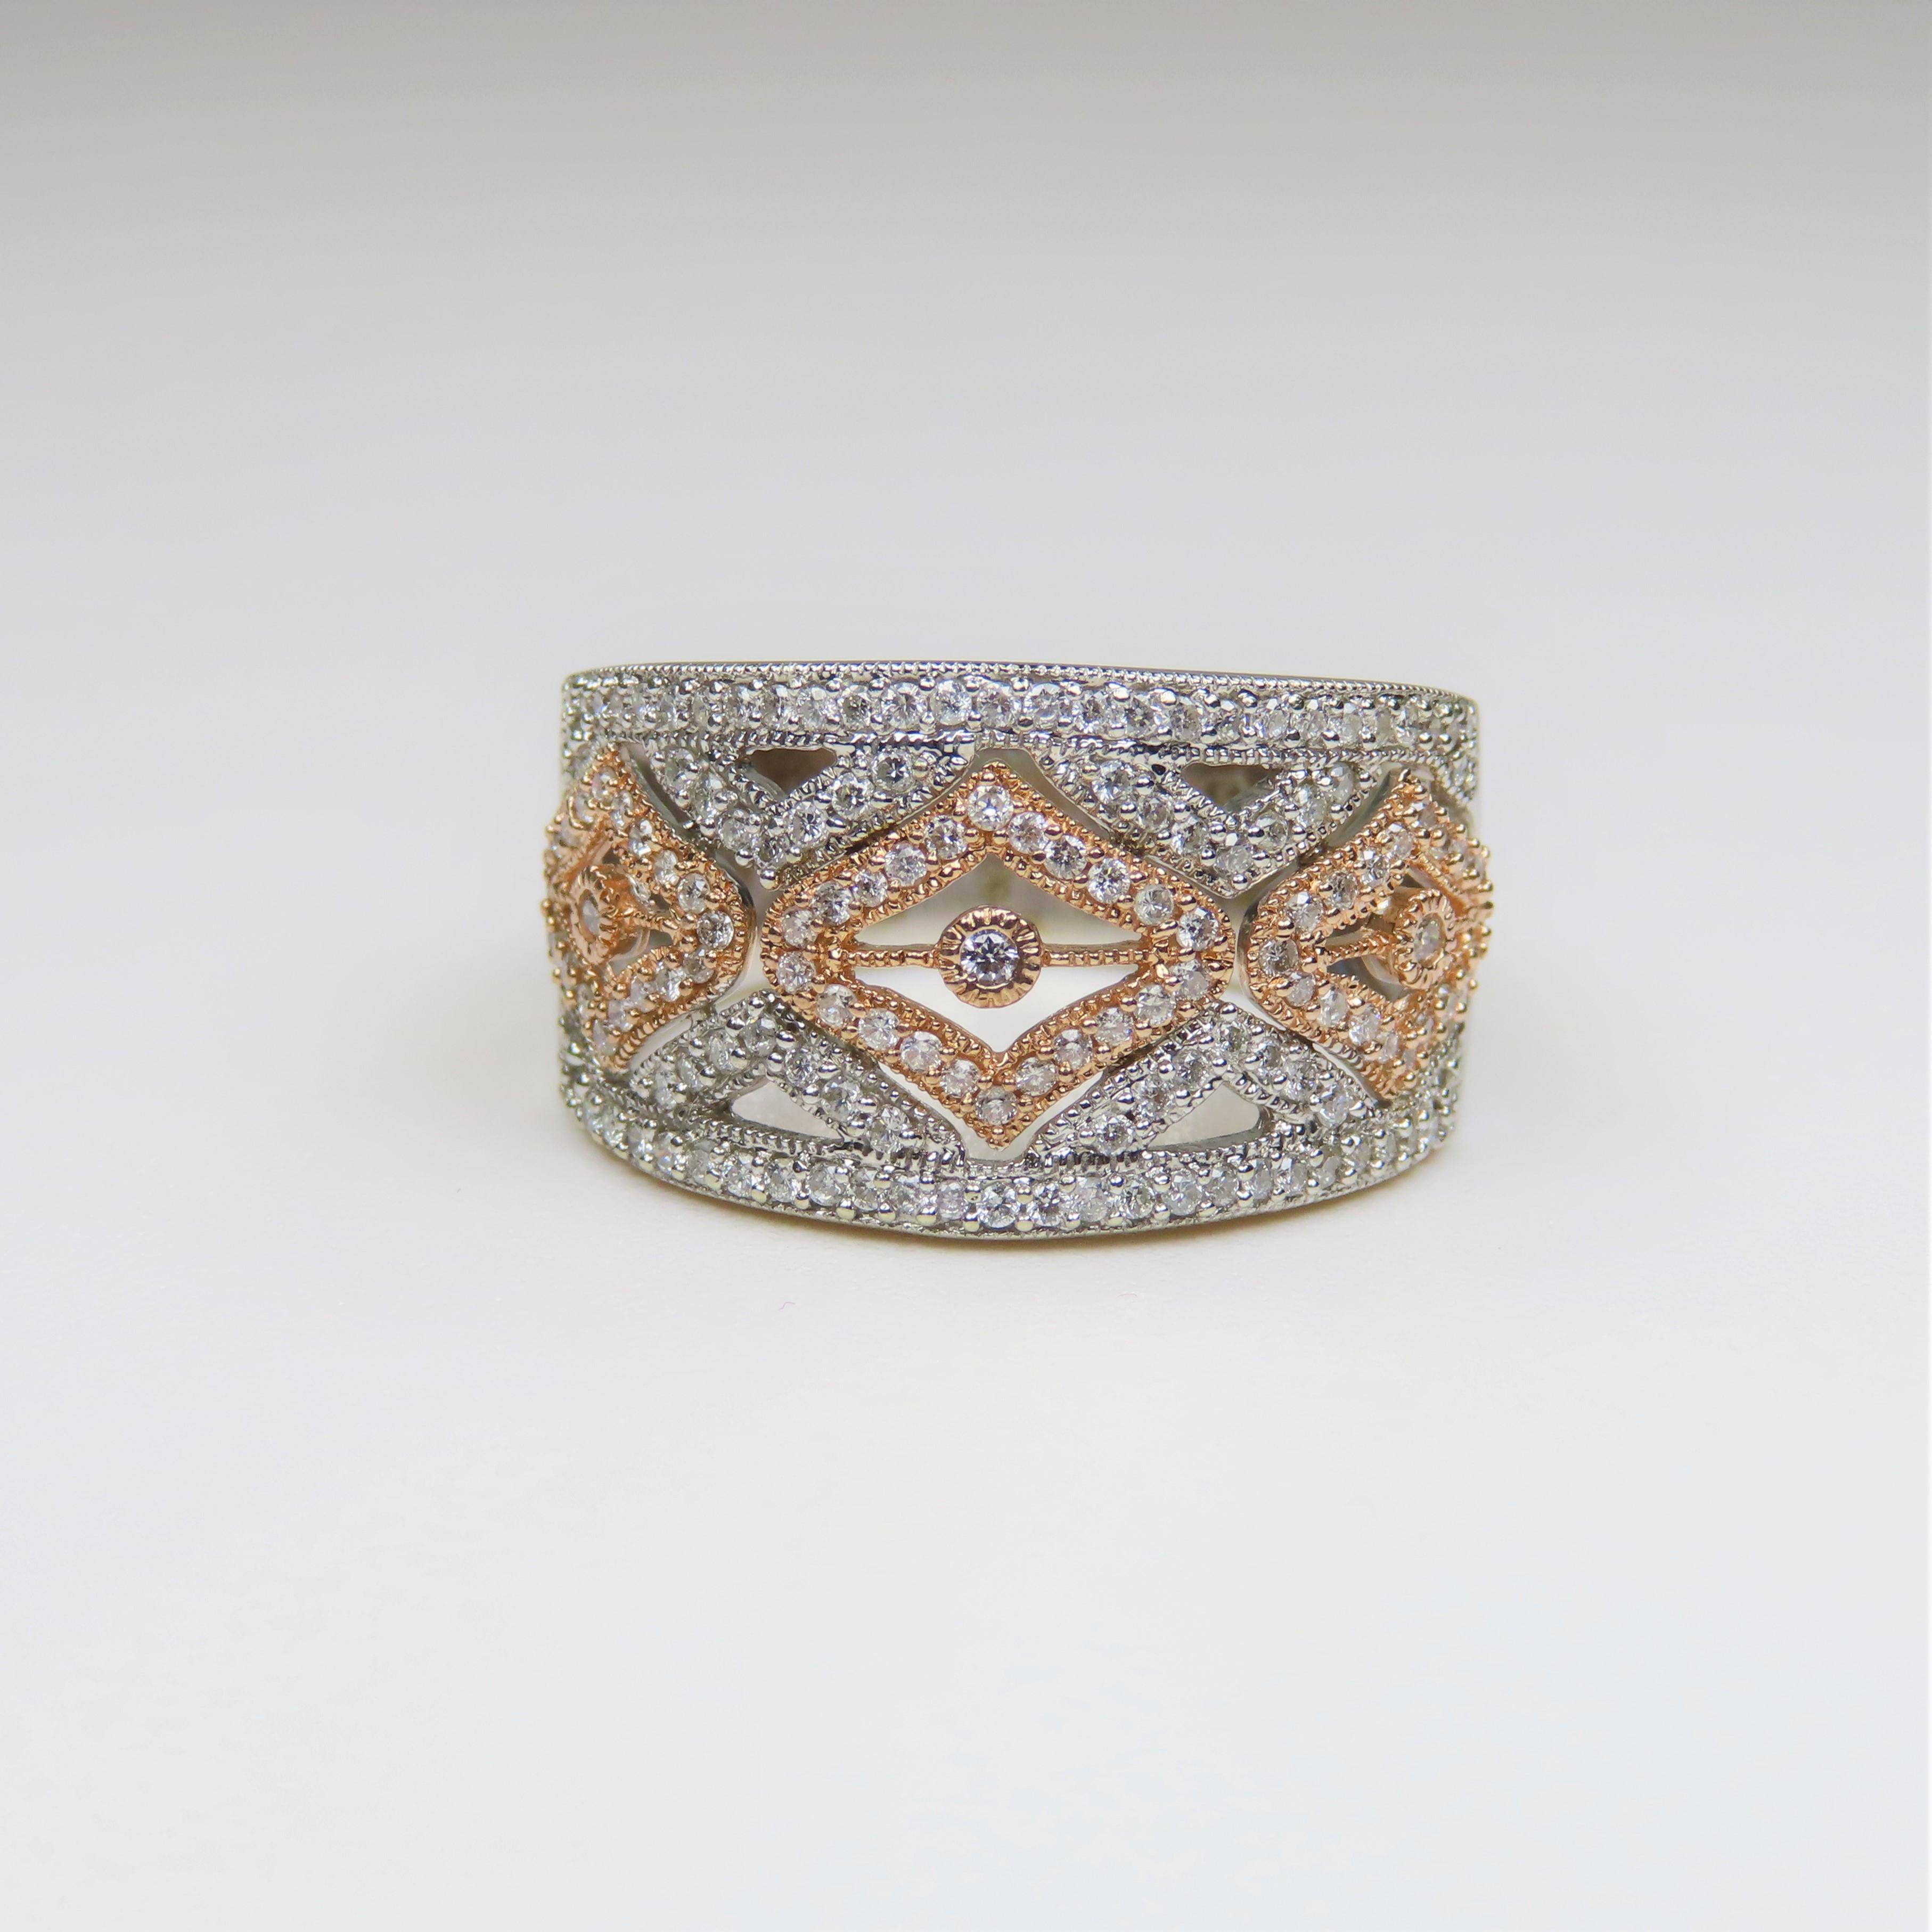 Beautifully Detailed Diamond Ring featuring